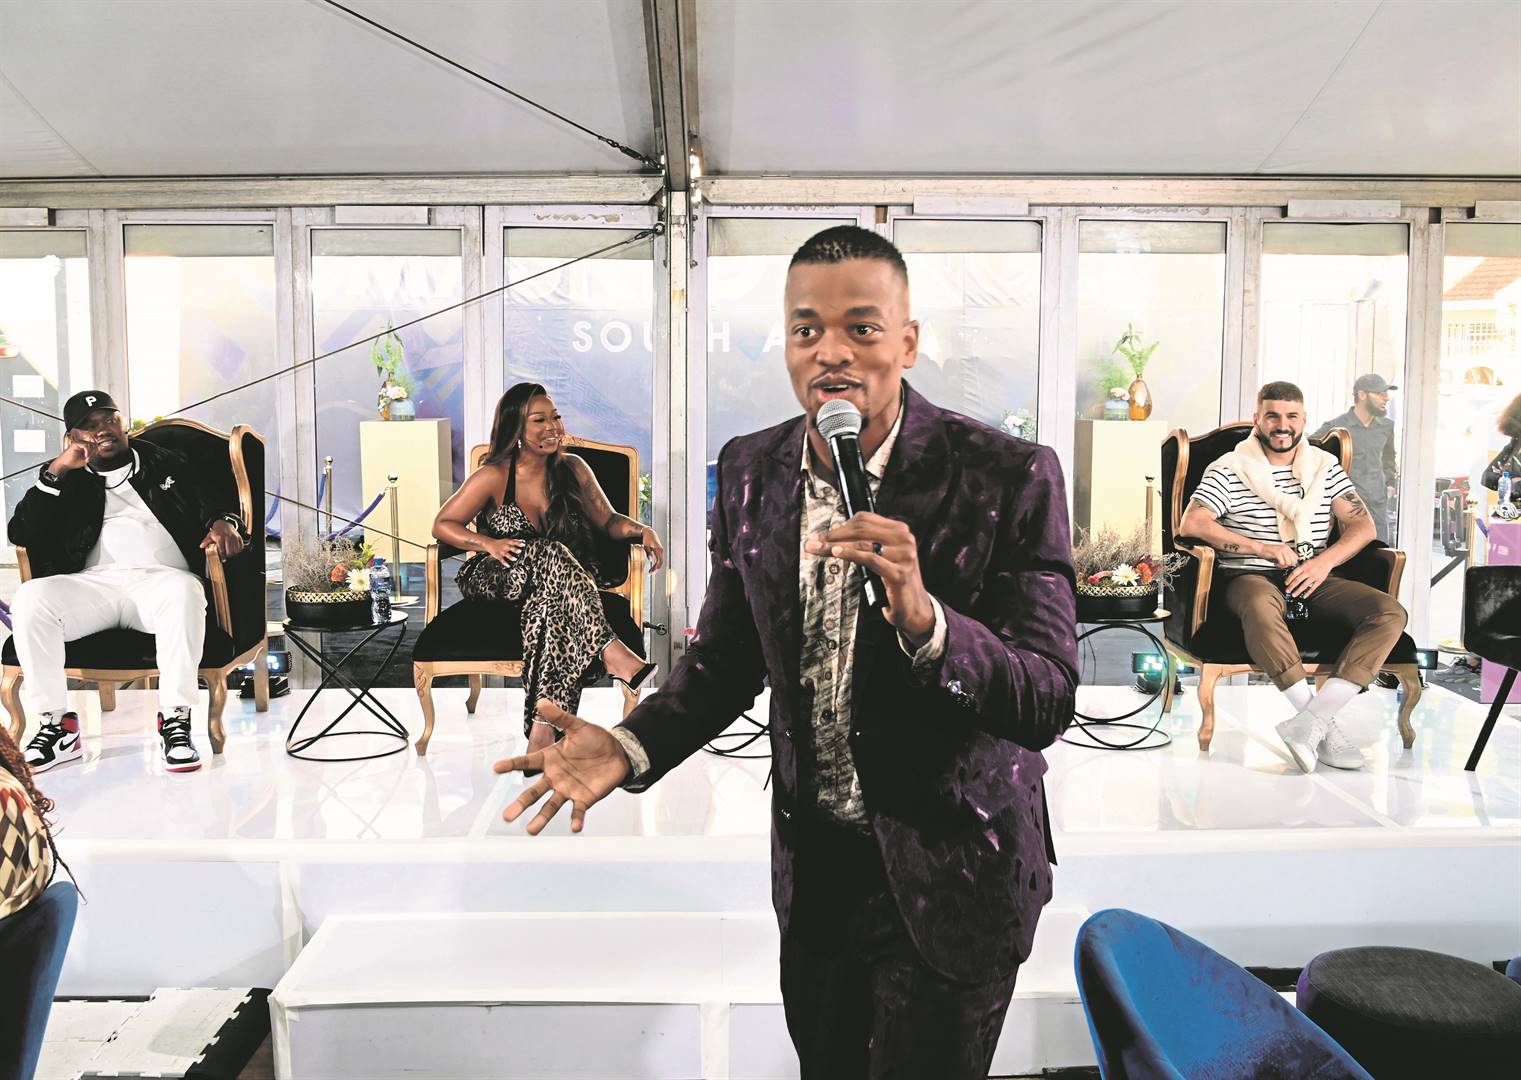 The overused comedian, Mpho Popps, launches The Masked Singer SA, a show in which the judges and audience do their best to identify a disguised singer.